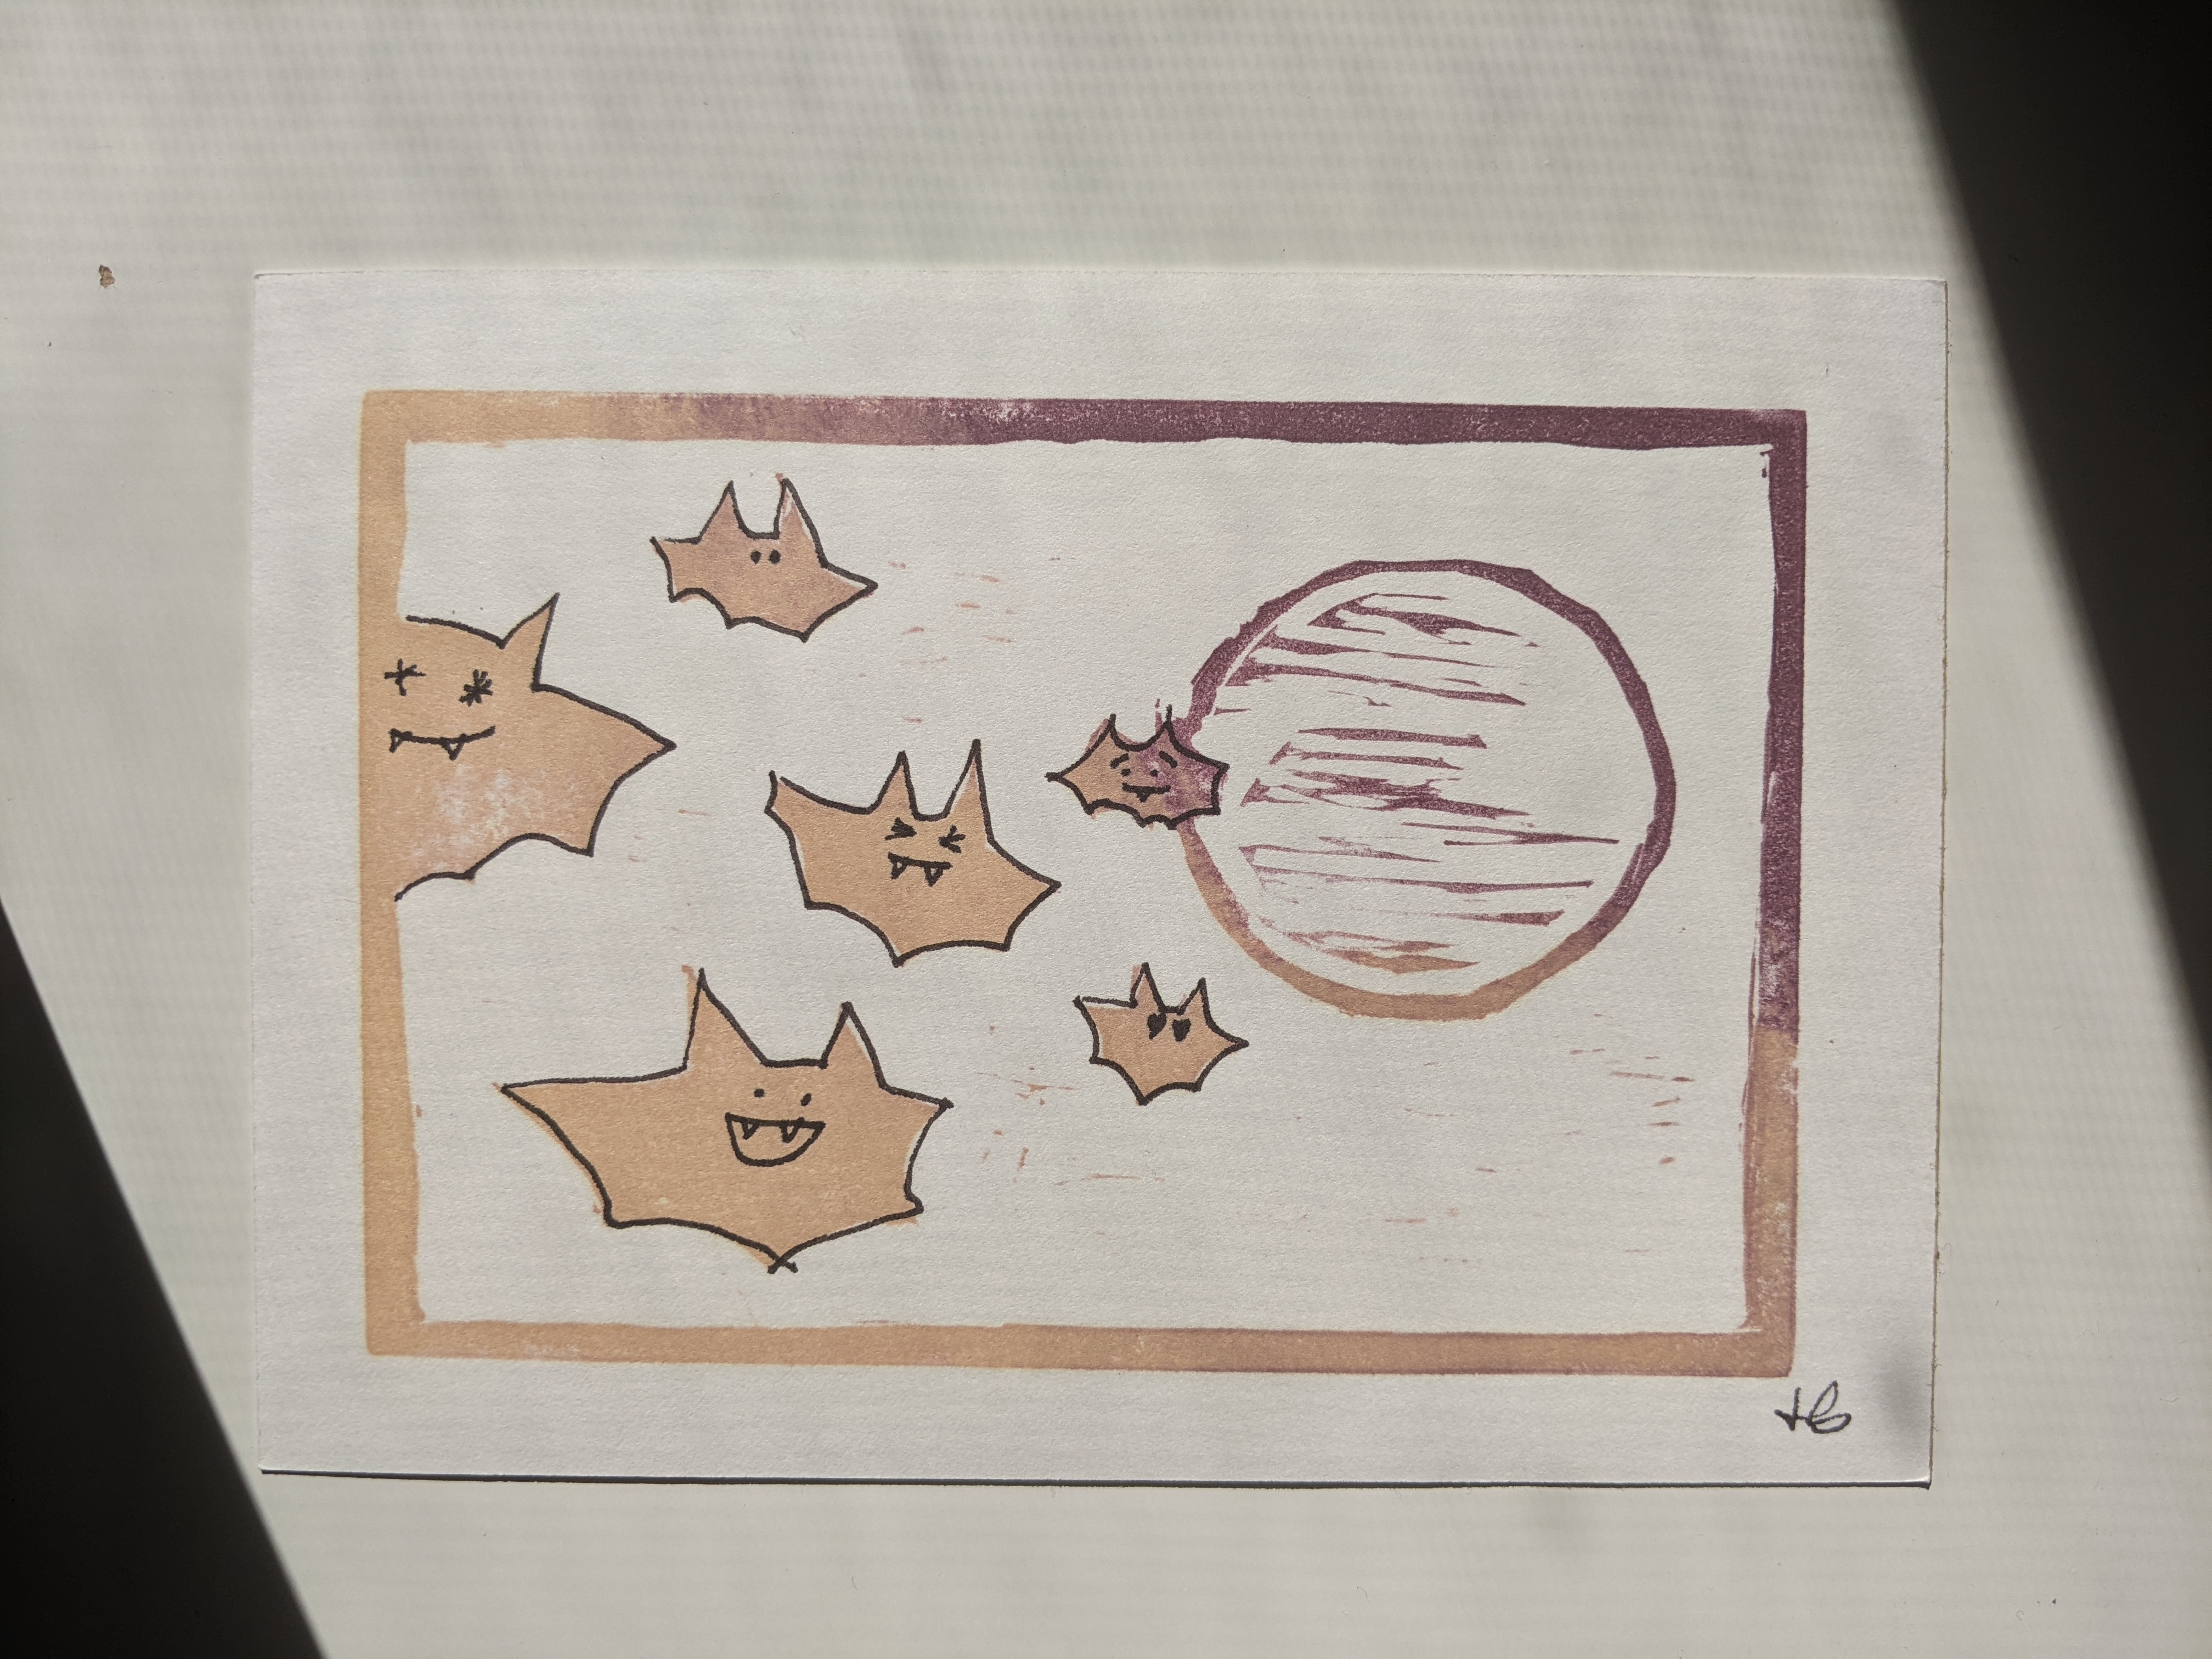 A small group of cute bats flying in front of a moon.